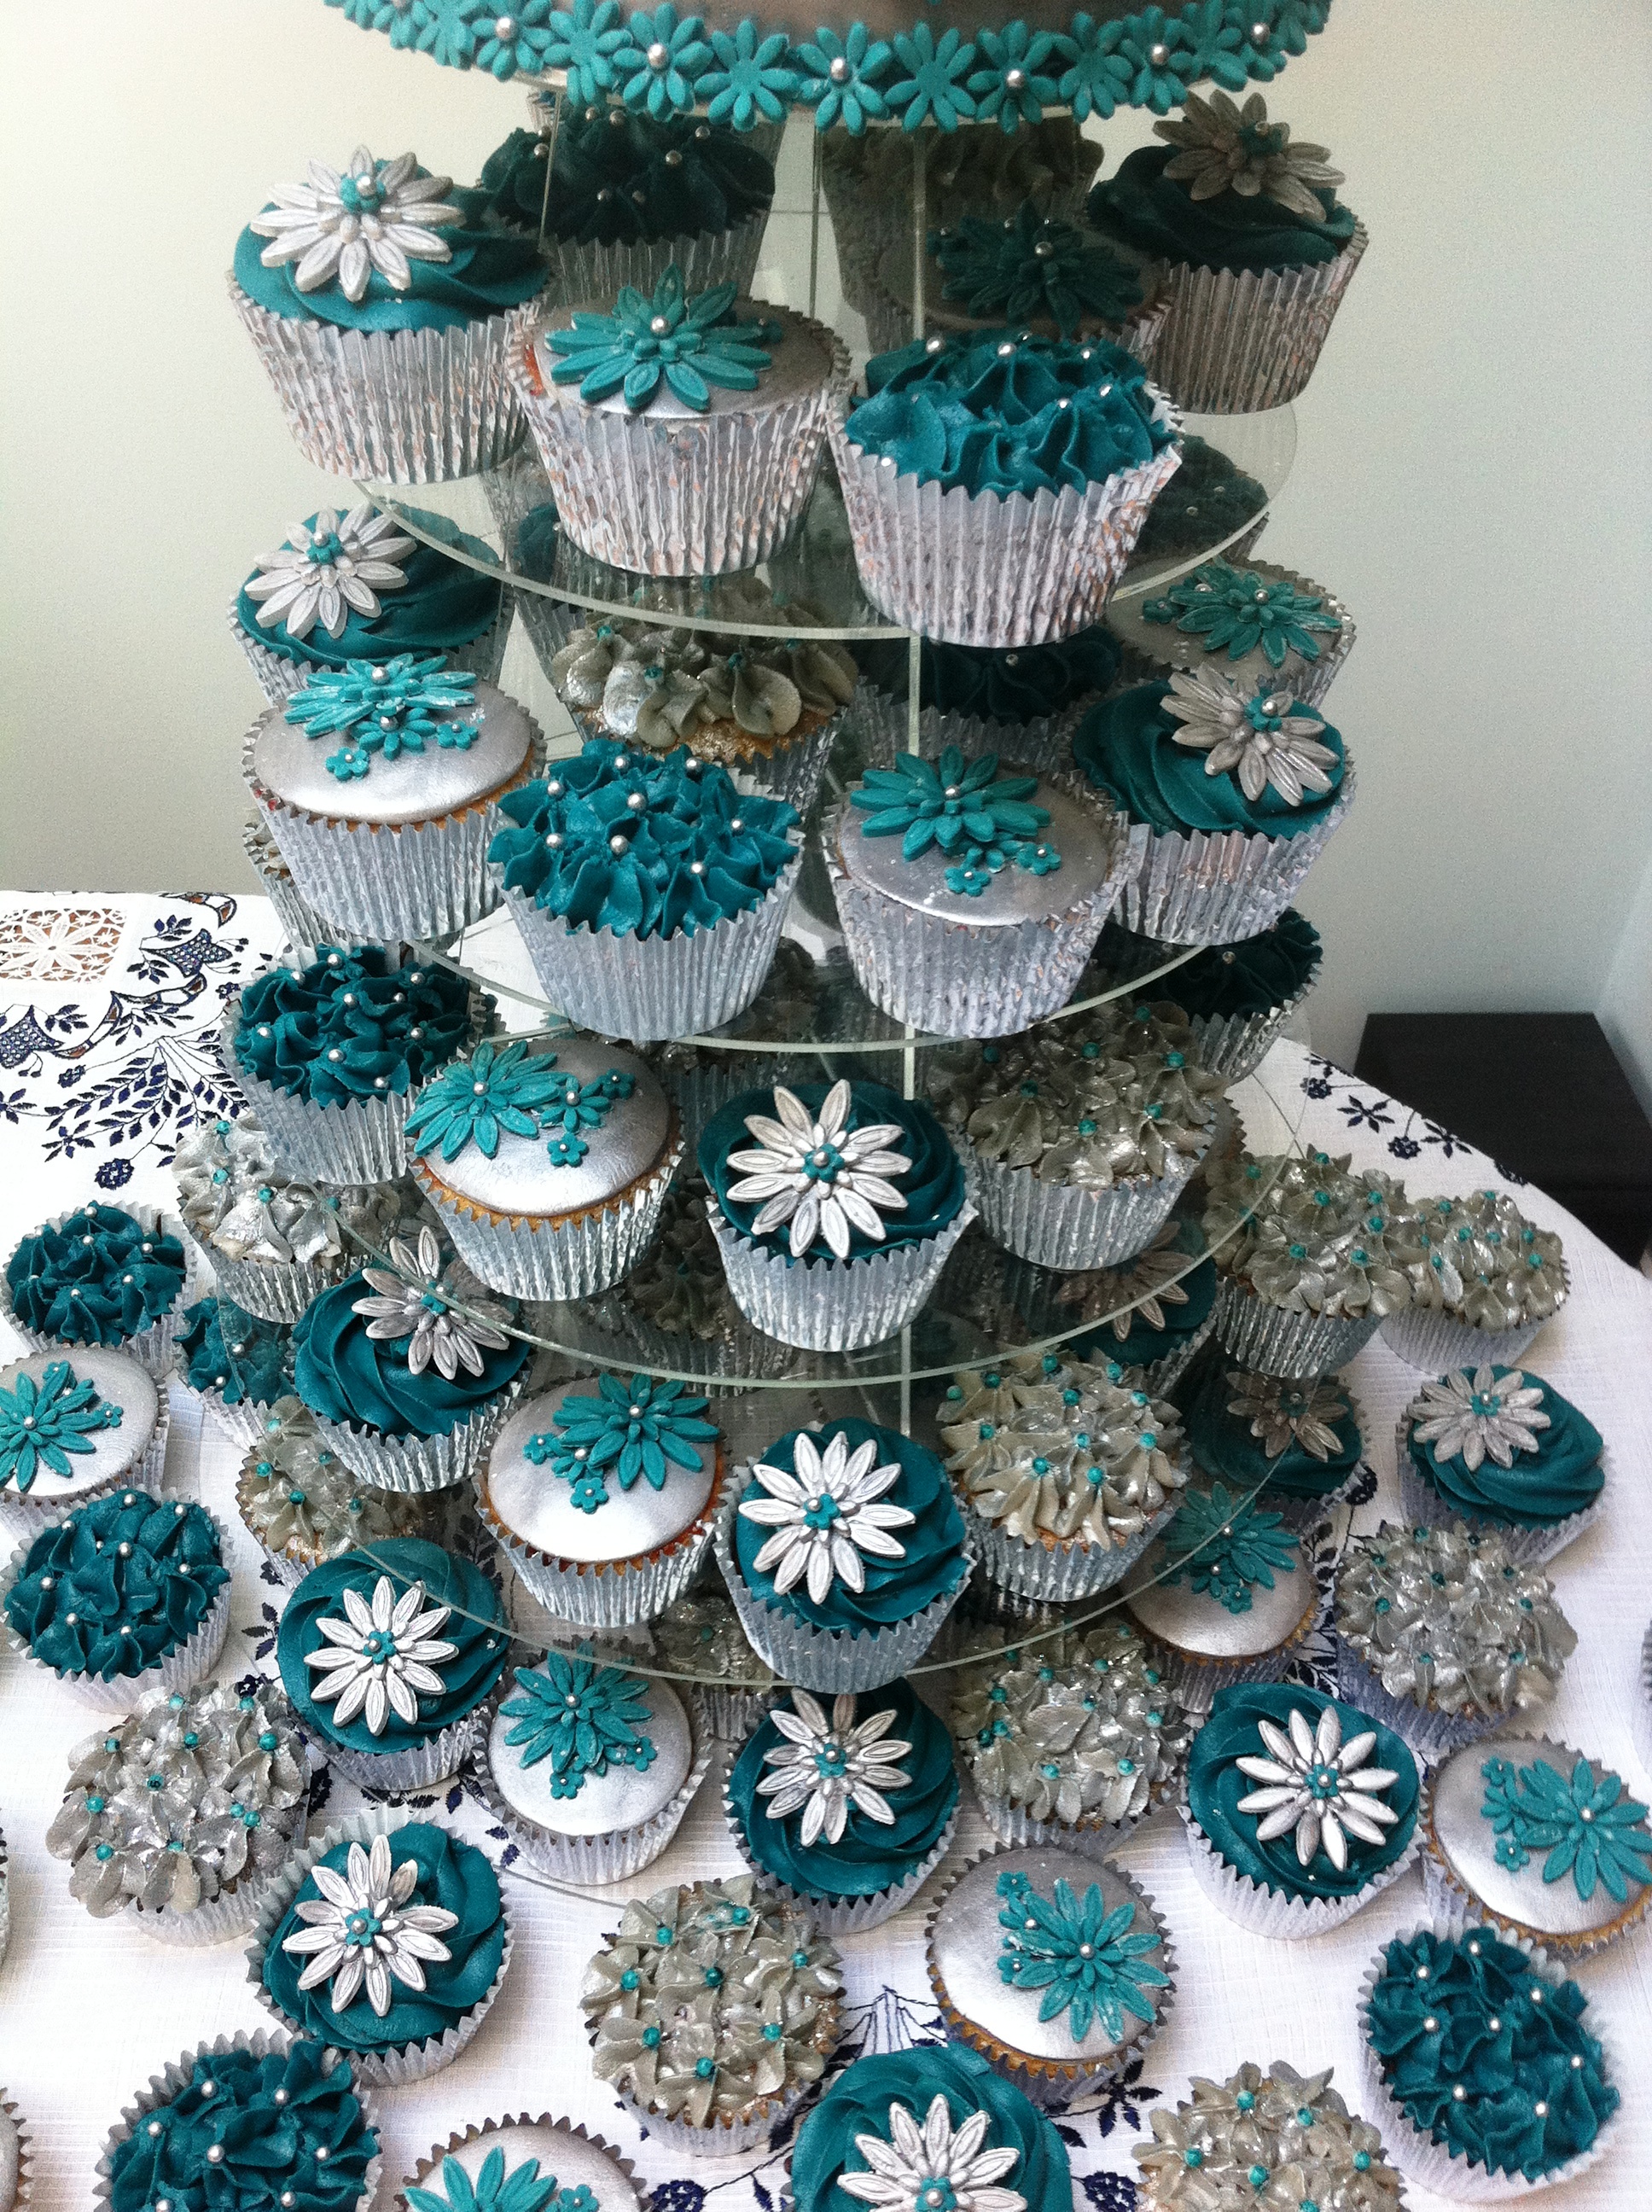 Silver and Teal Wedding Cupcakes Decorations